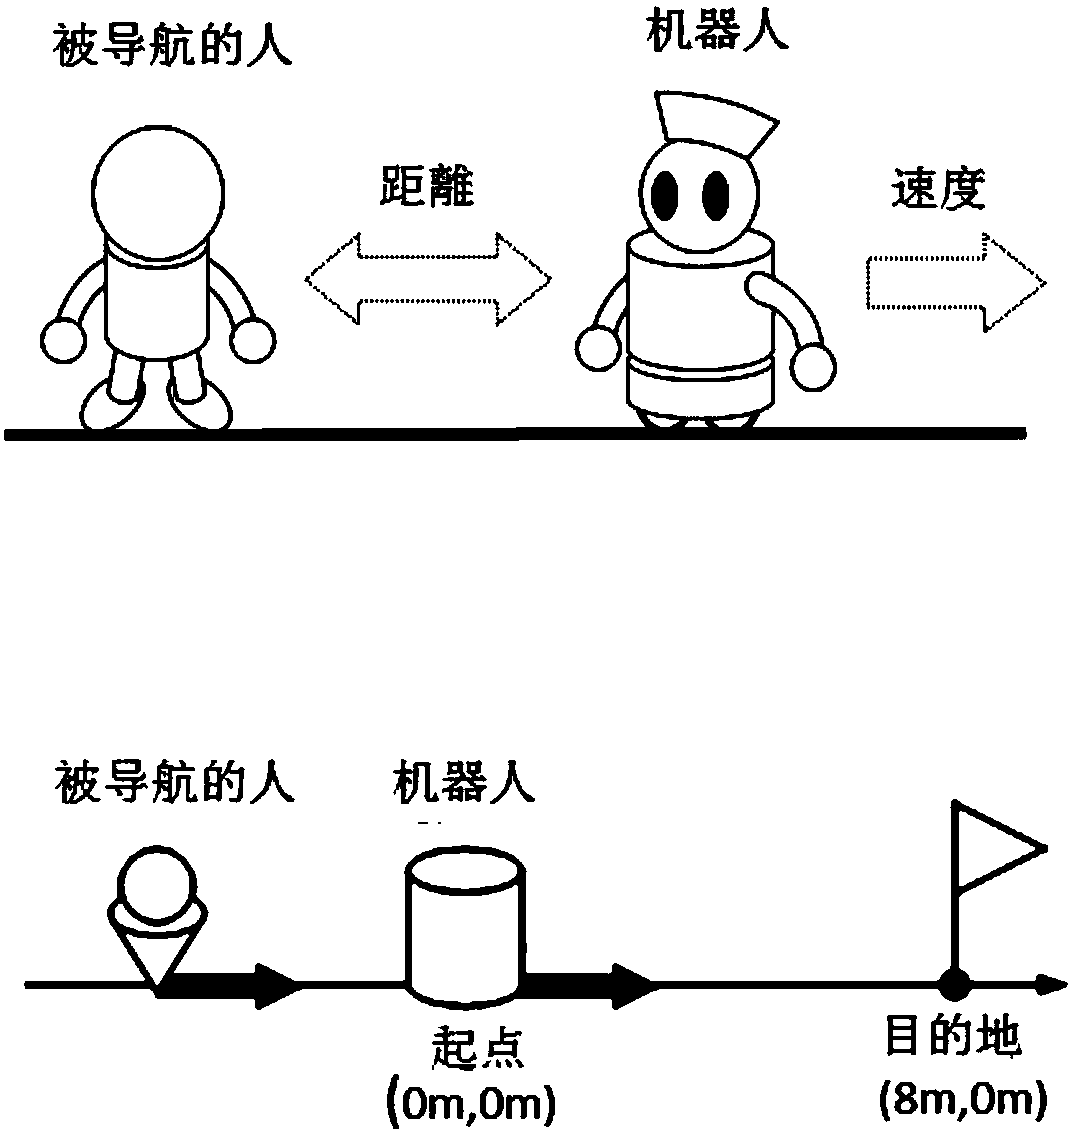 Navigation trail planning method of mobile robot based on distance-type fuzzy reasoning